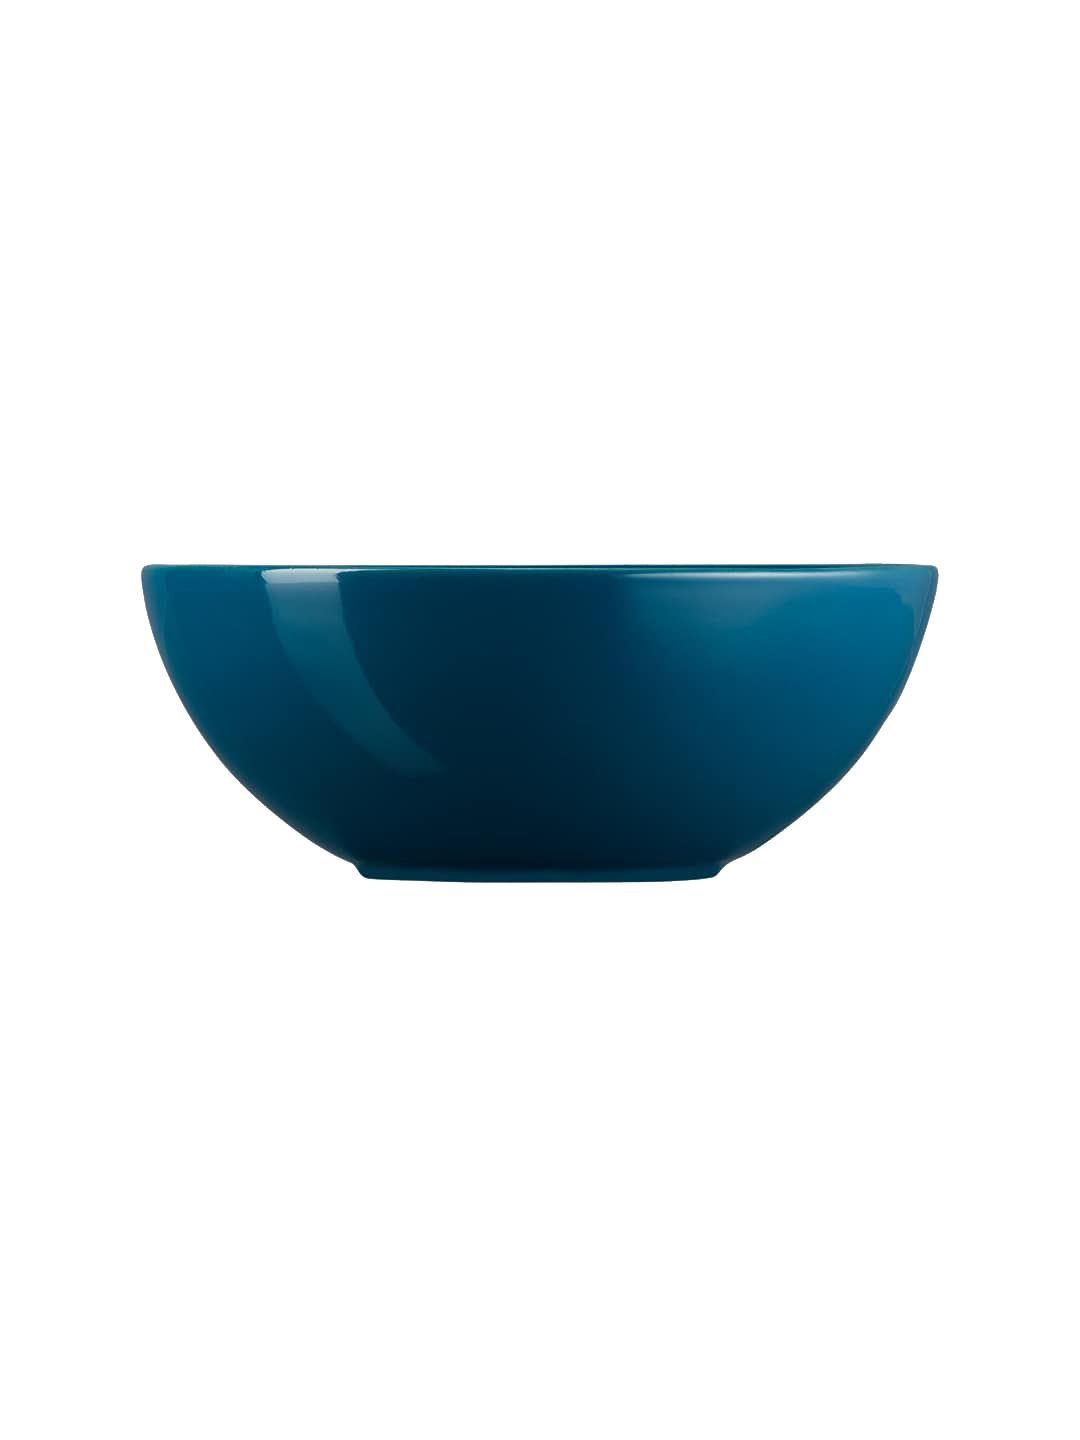 LE CREUSET Teal Solid Serving Bowl 16 cm Price in India